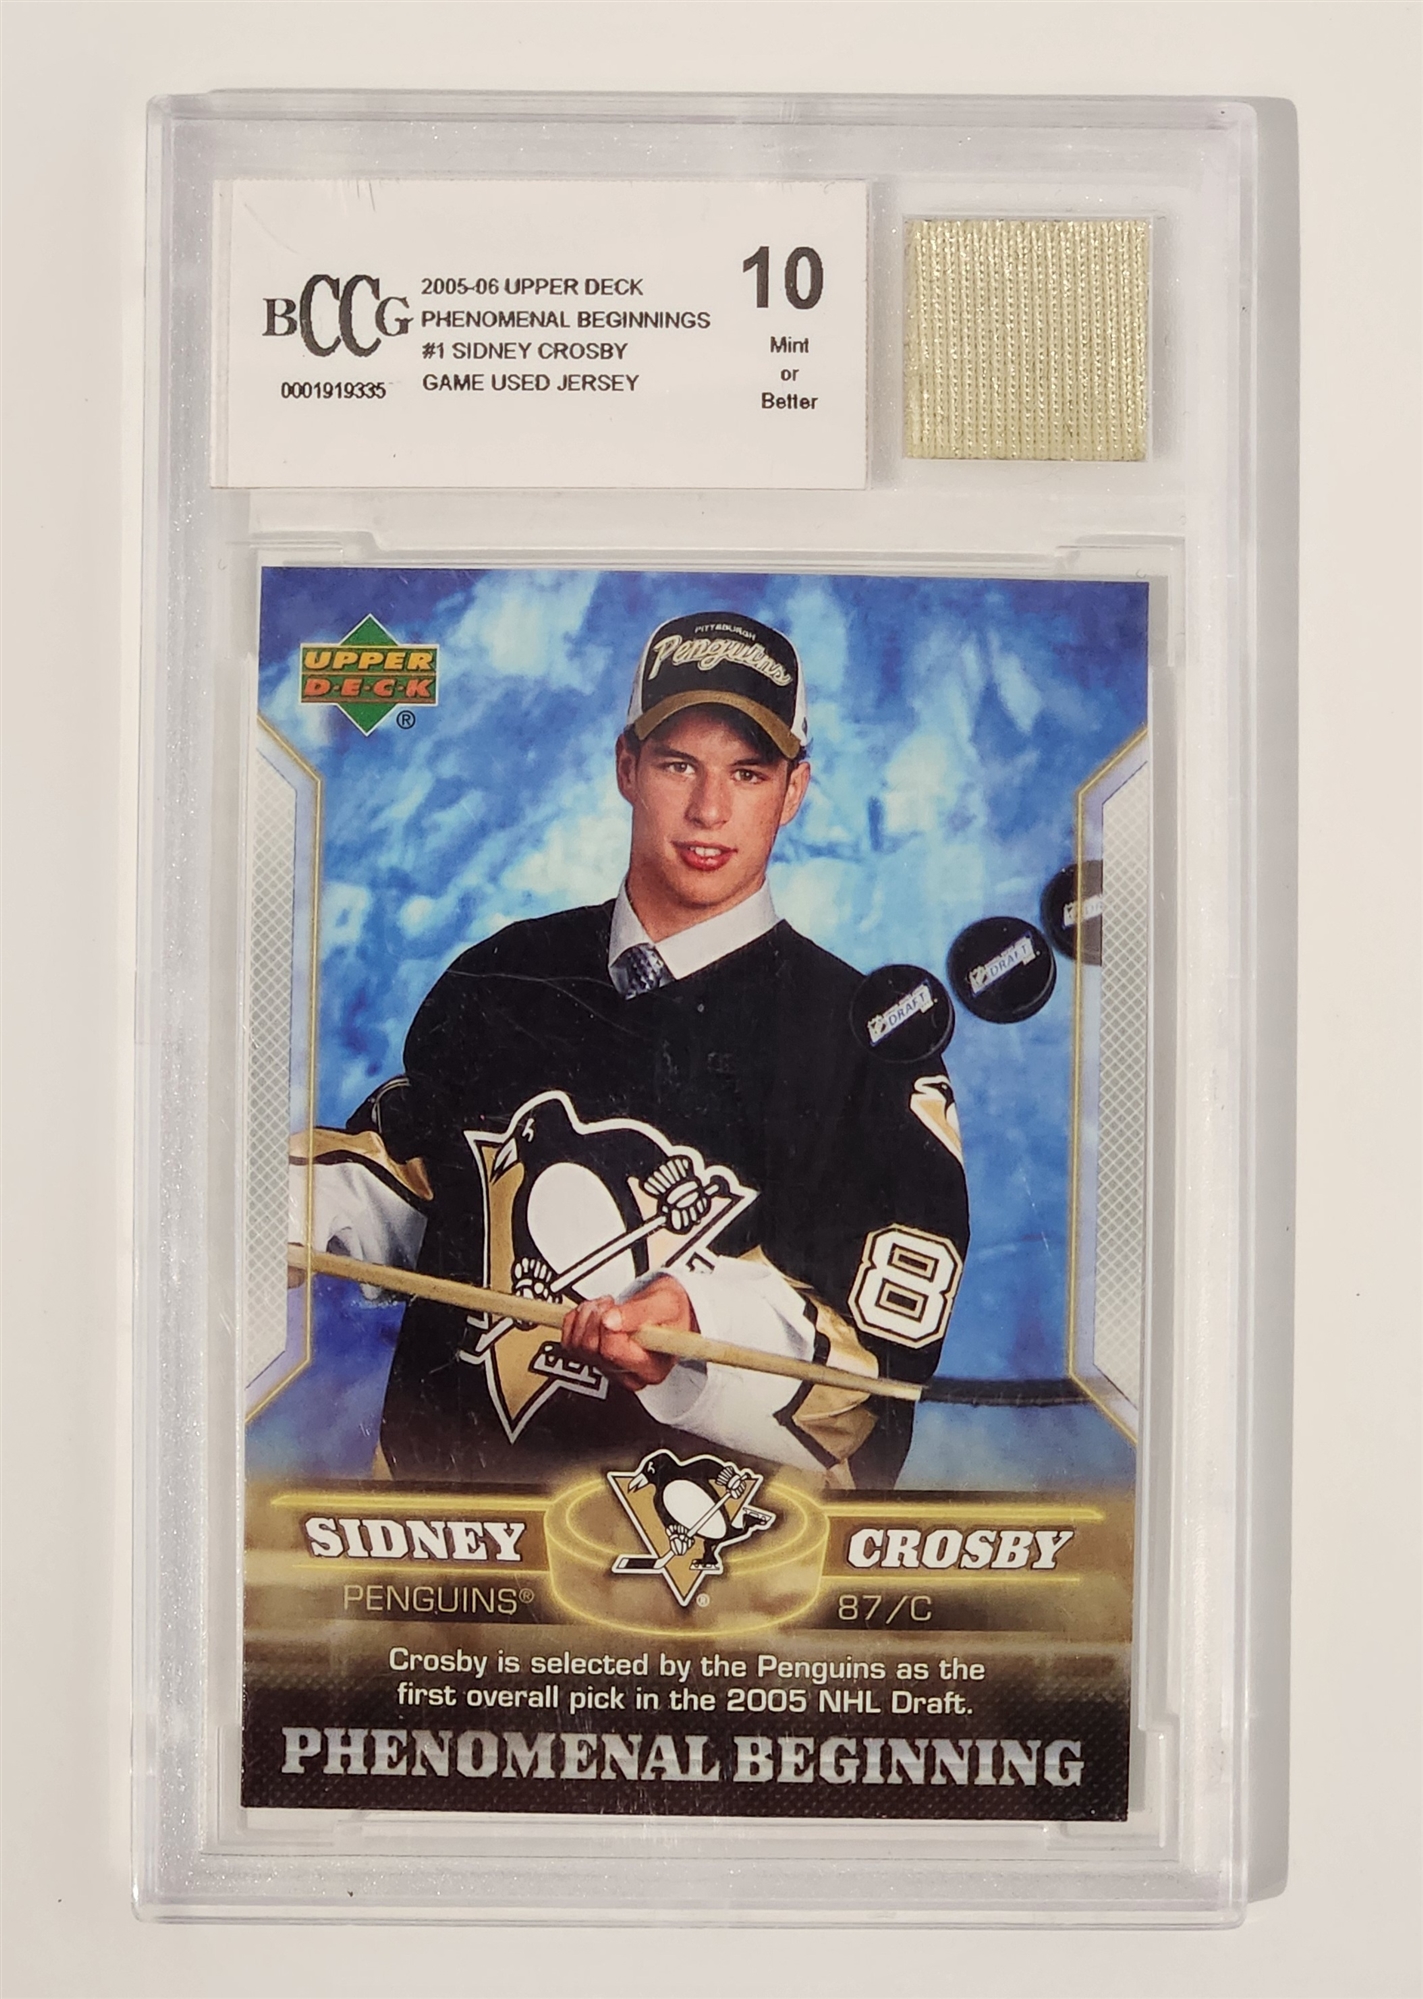 2005-06 Upper Deck Phenomenal Beginnings Sidney Crosby Game Used Jersey Card